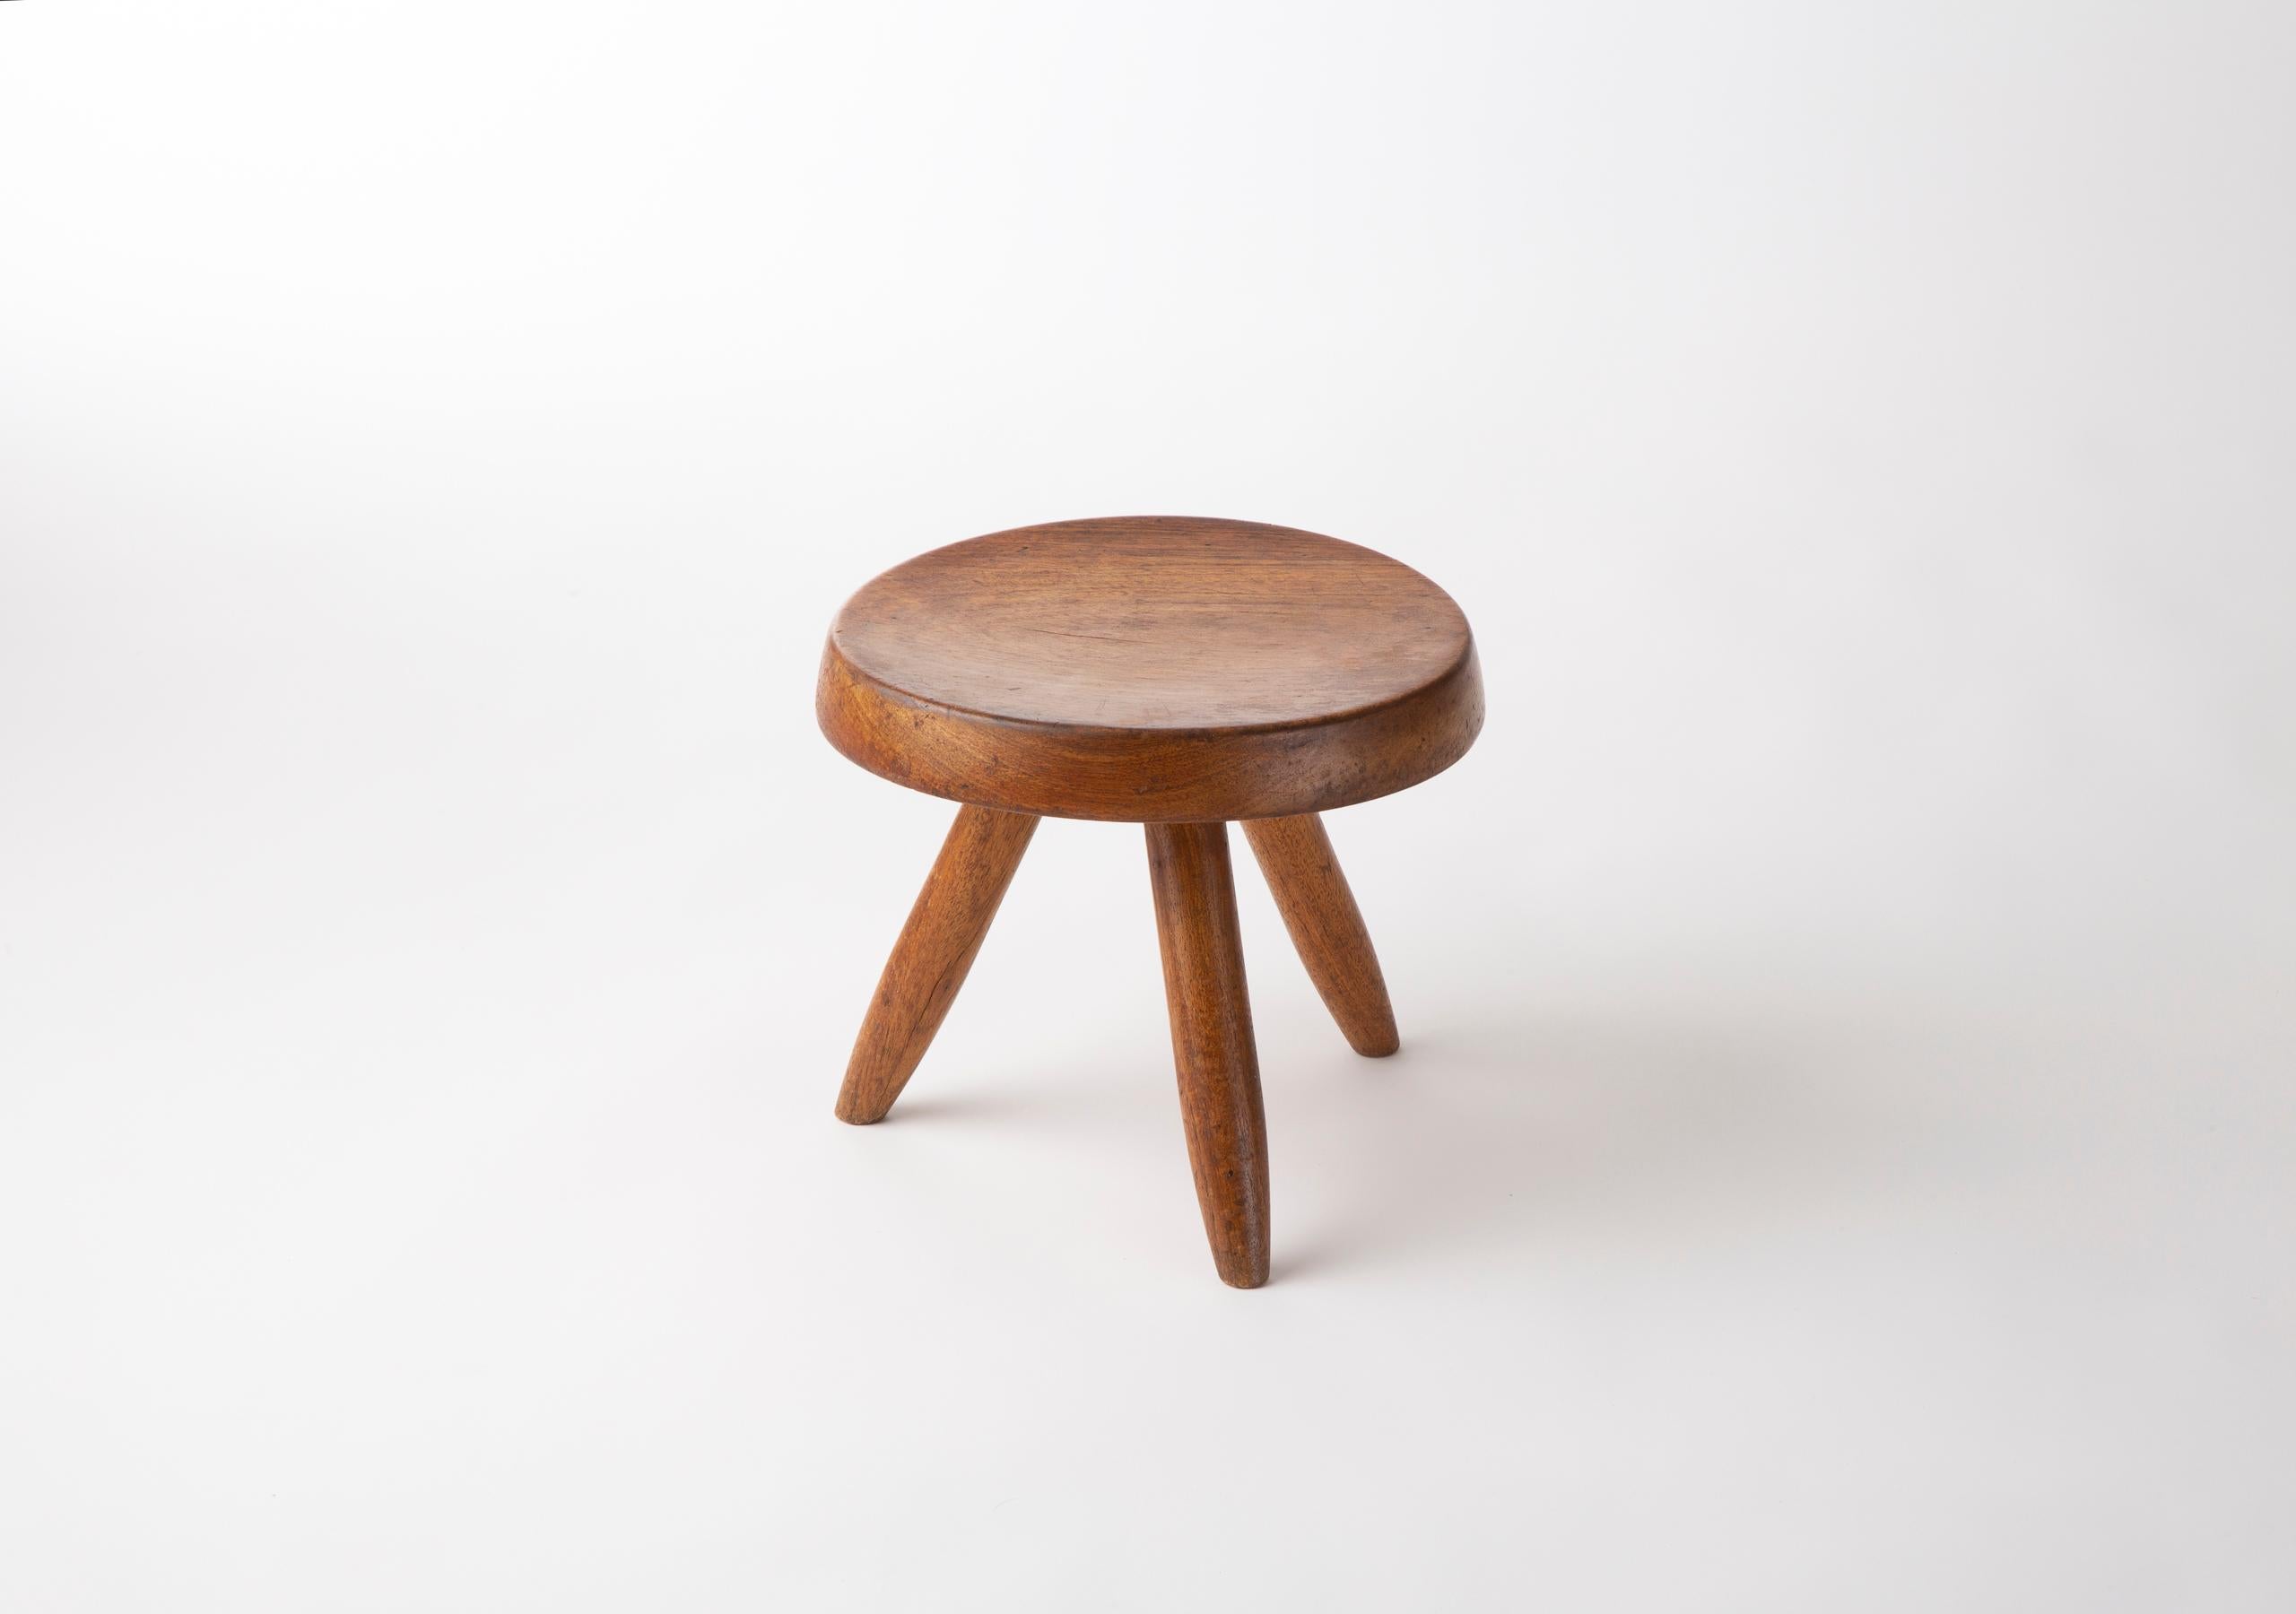 “Berger” stool by Charlotte Perriand
Mahogany
Issued by Steph Simon, France
circa 1956.